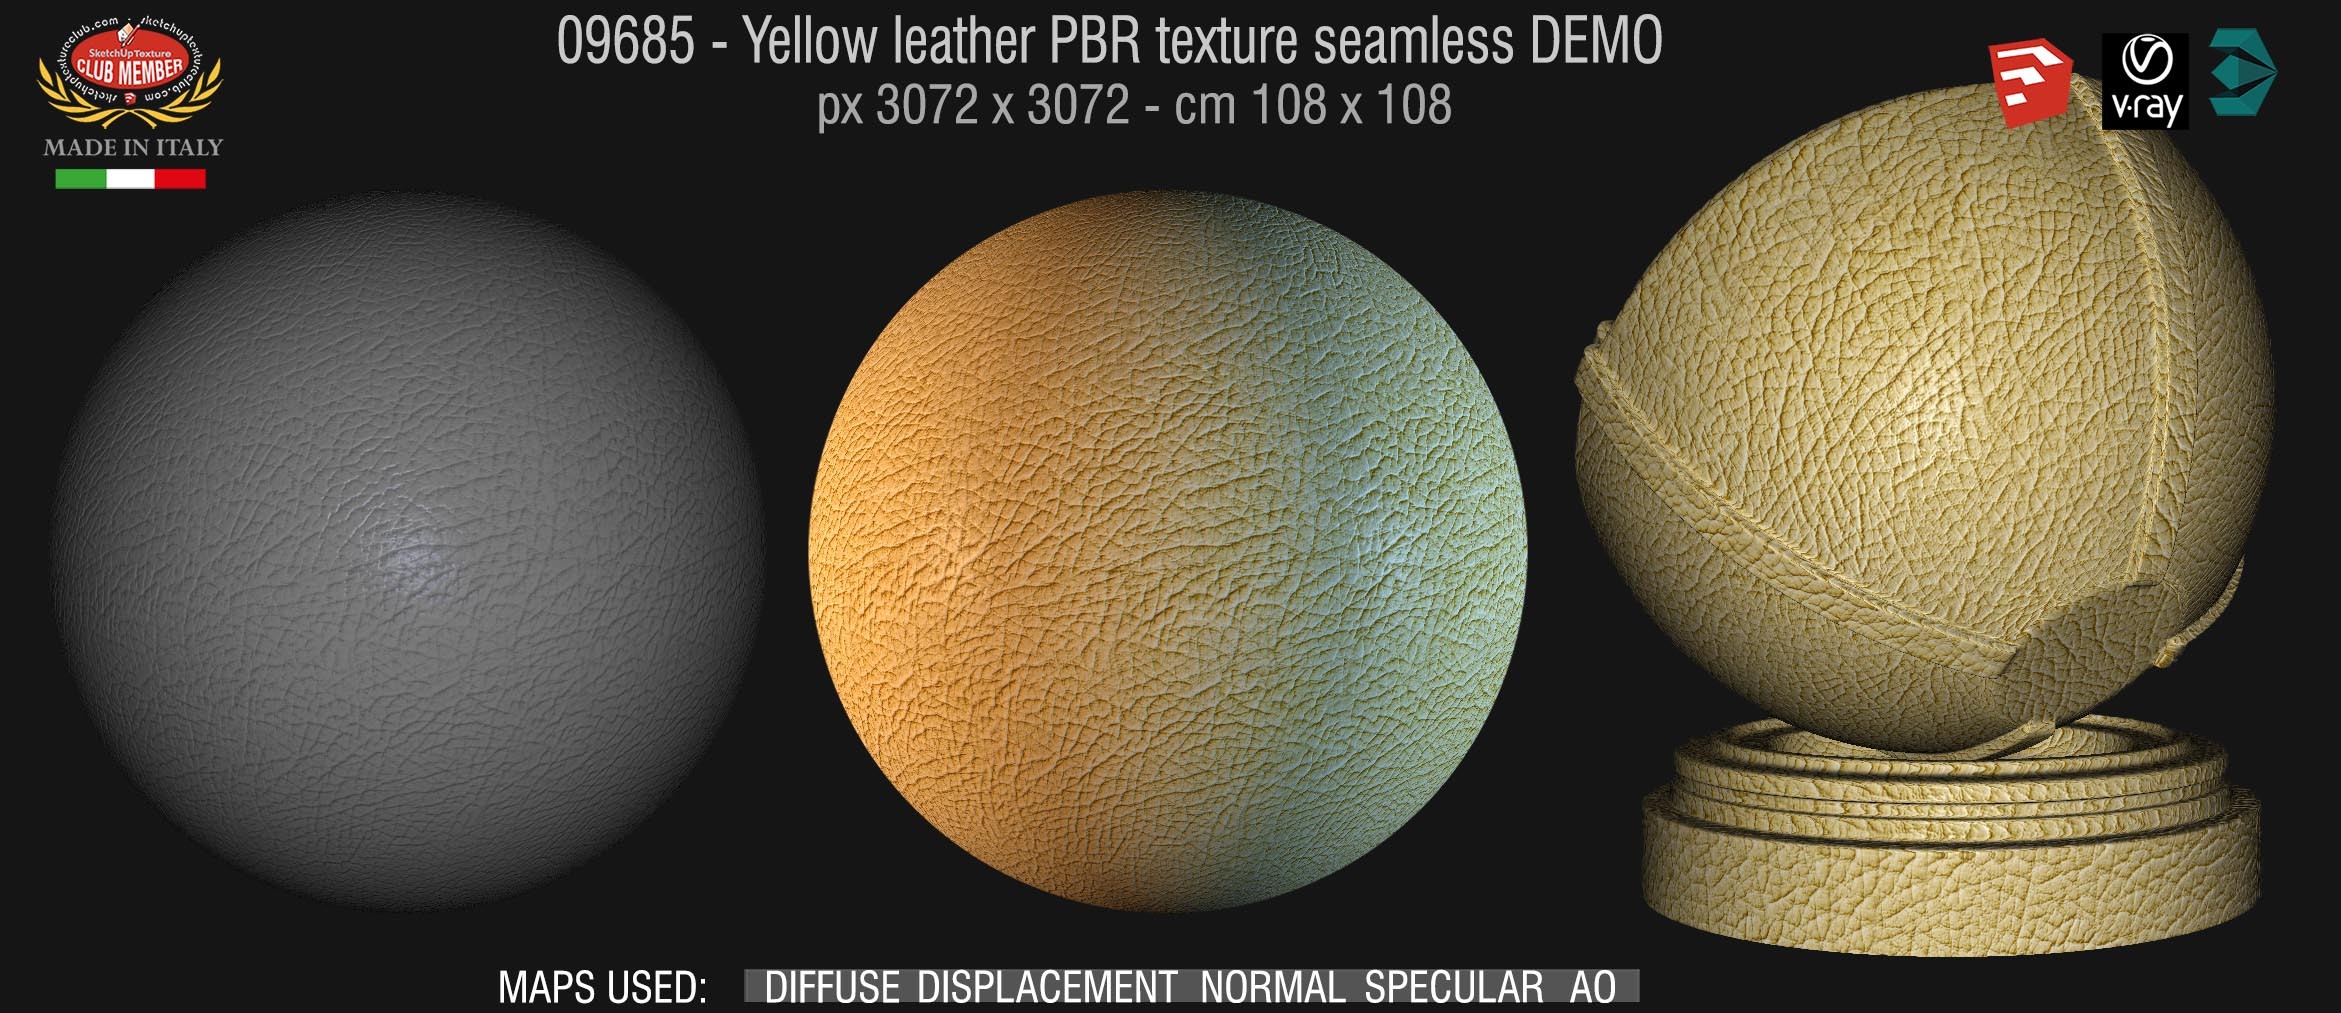 09685 Yellow leather PBR texture seamless DEMO